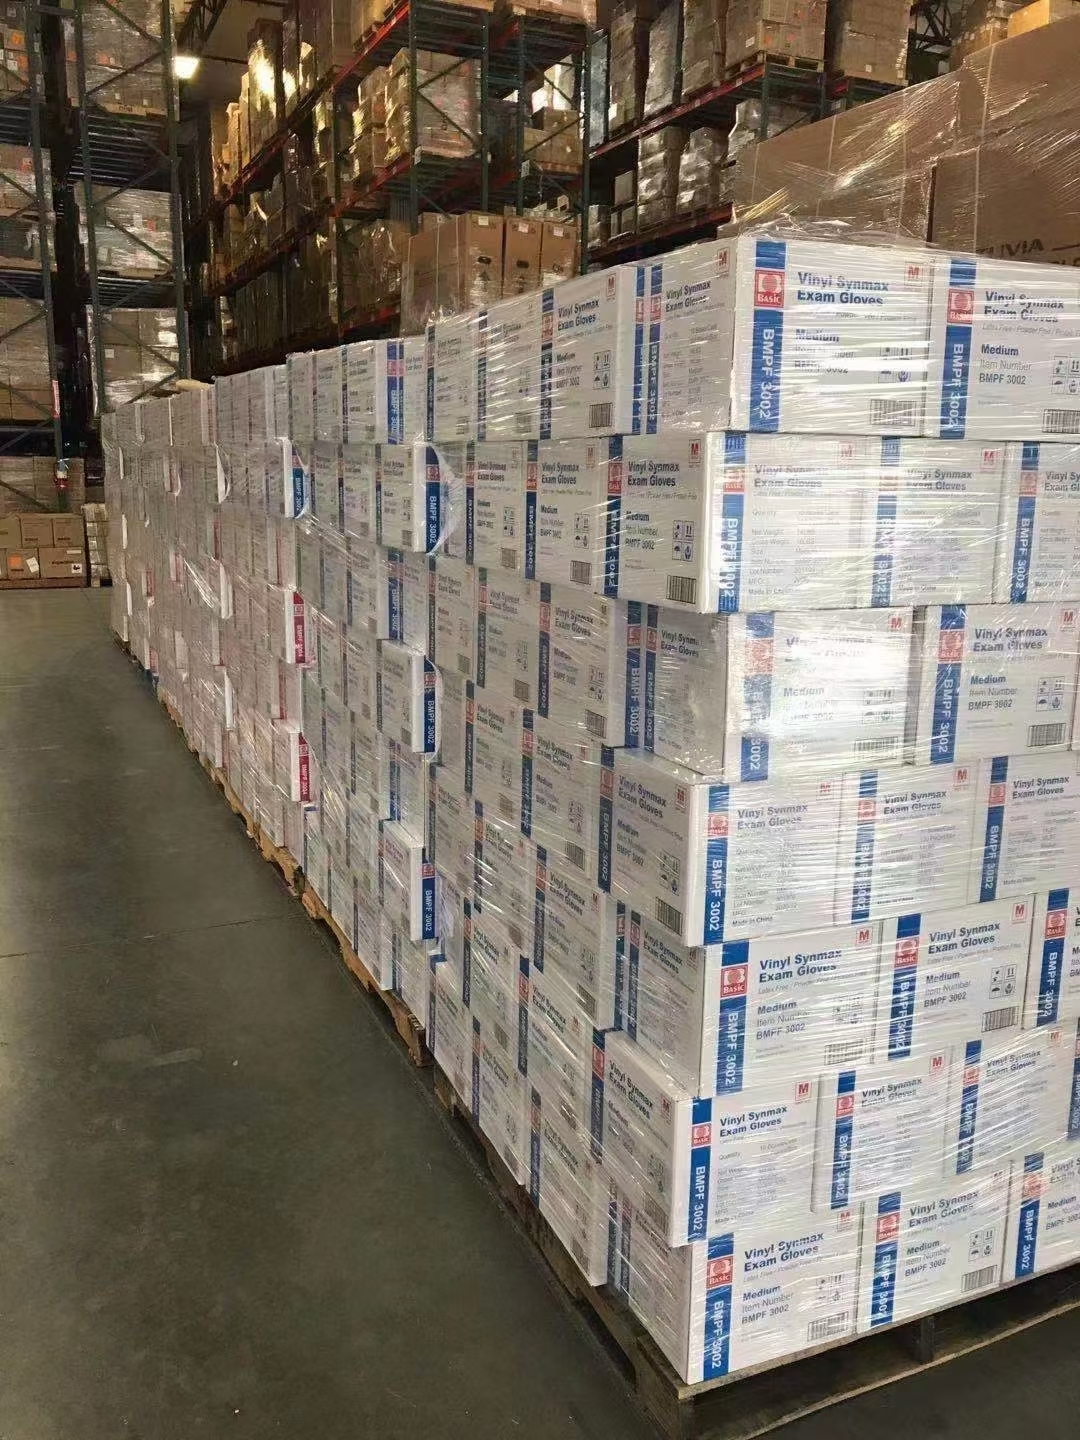 Intco basic  Medical  examination synmax vinyl  OGT ready stock in Los Angeles 3200 cartons